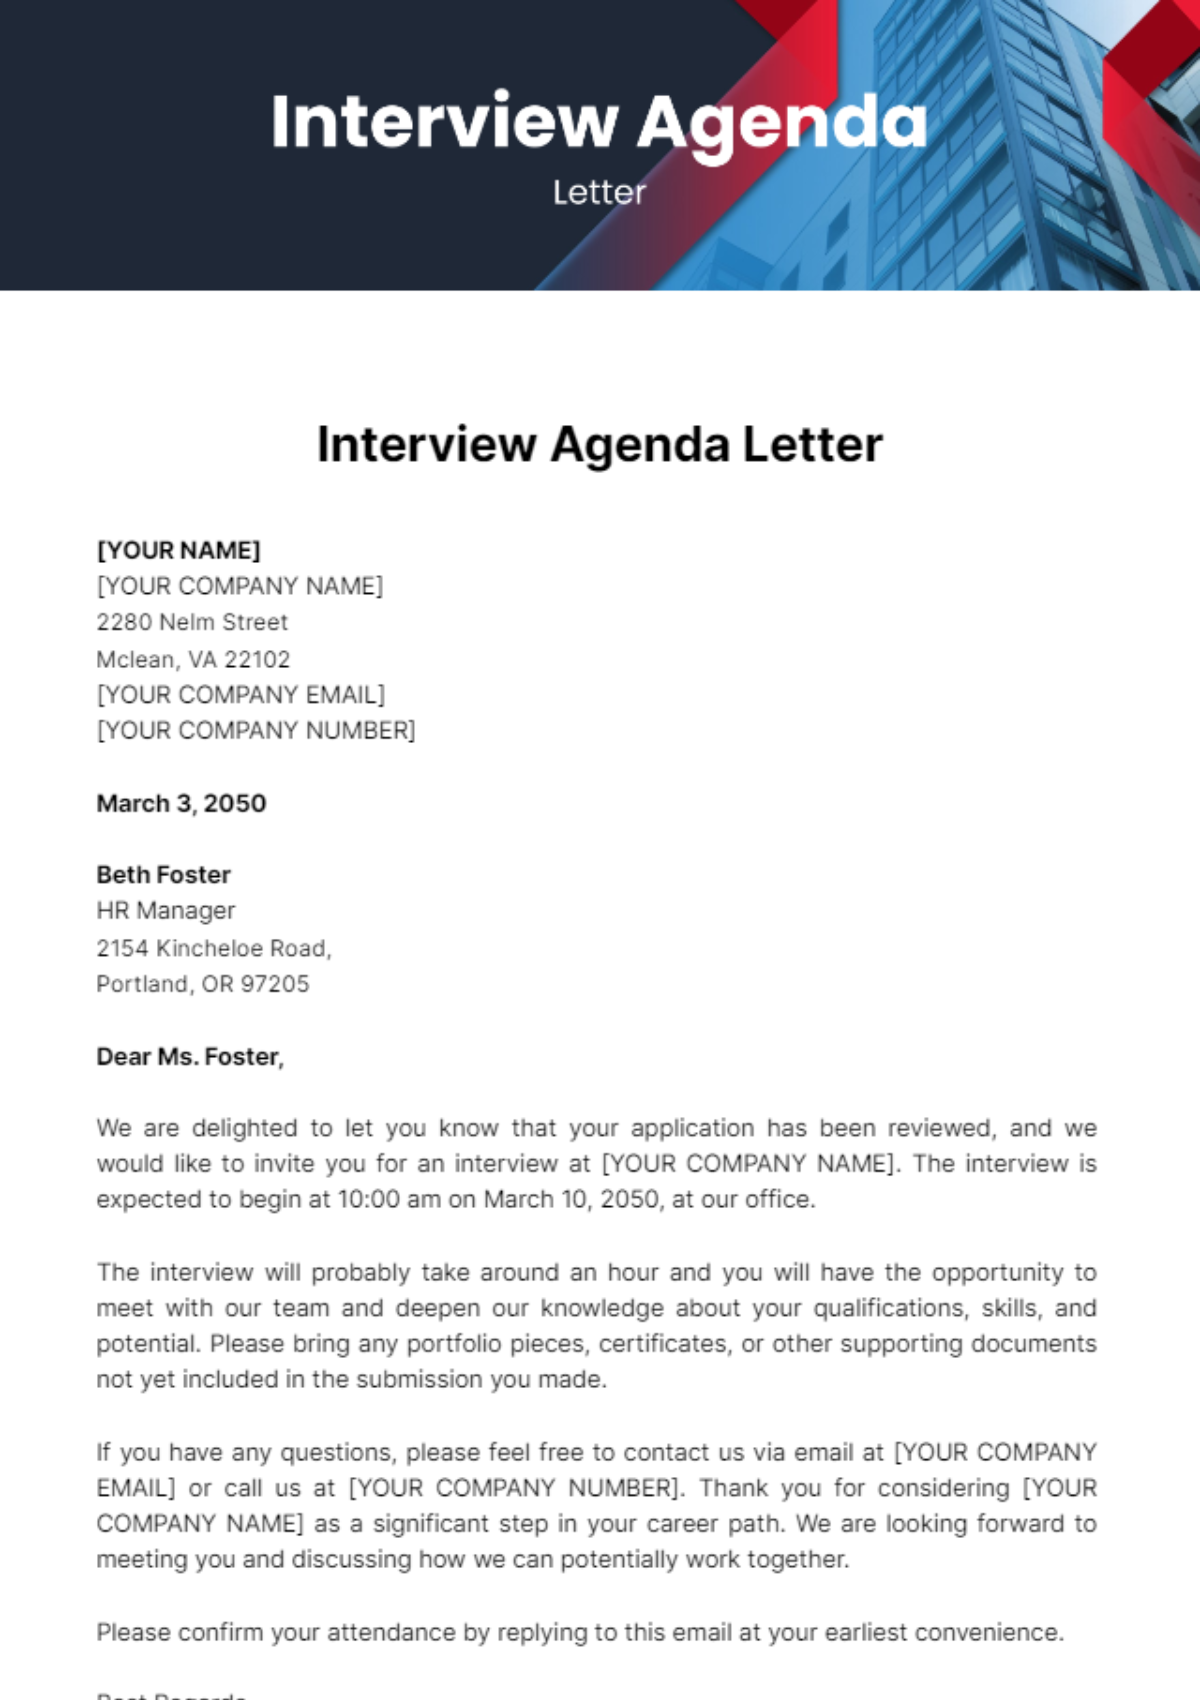 Free Interview Agenda Letter Template